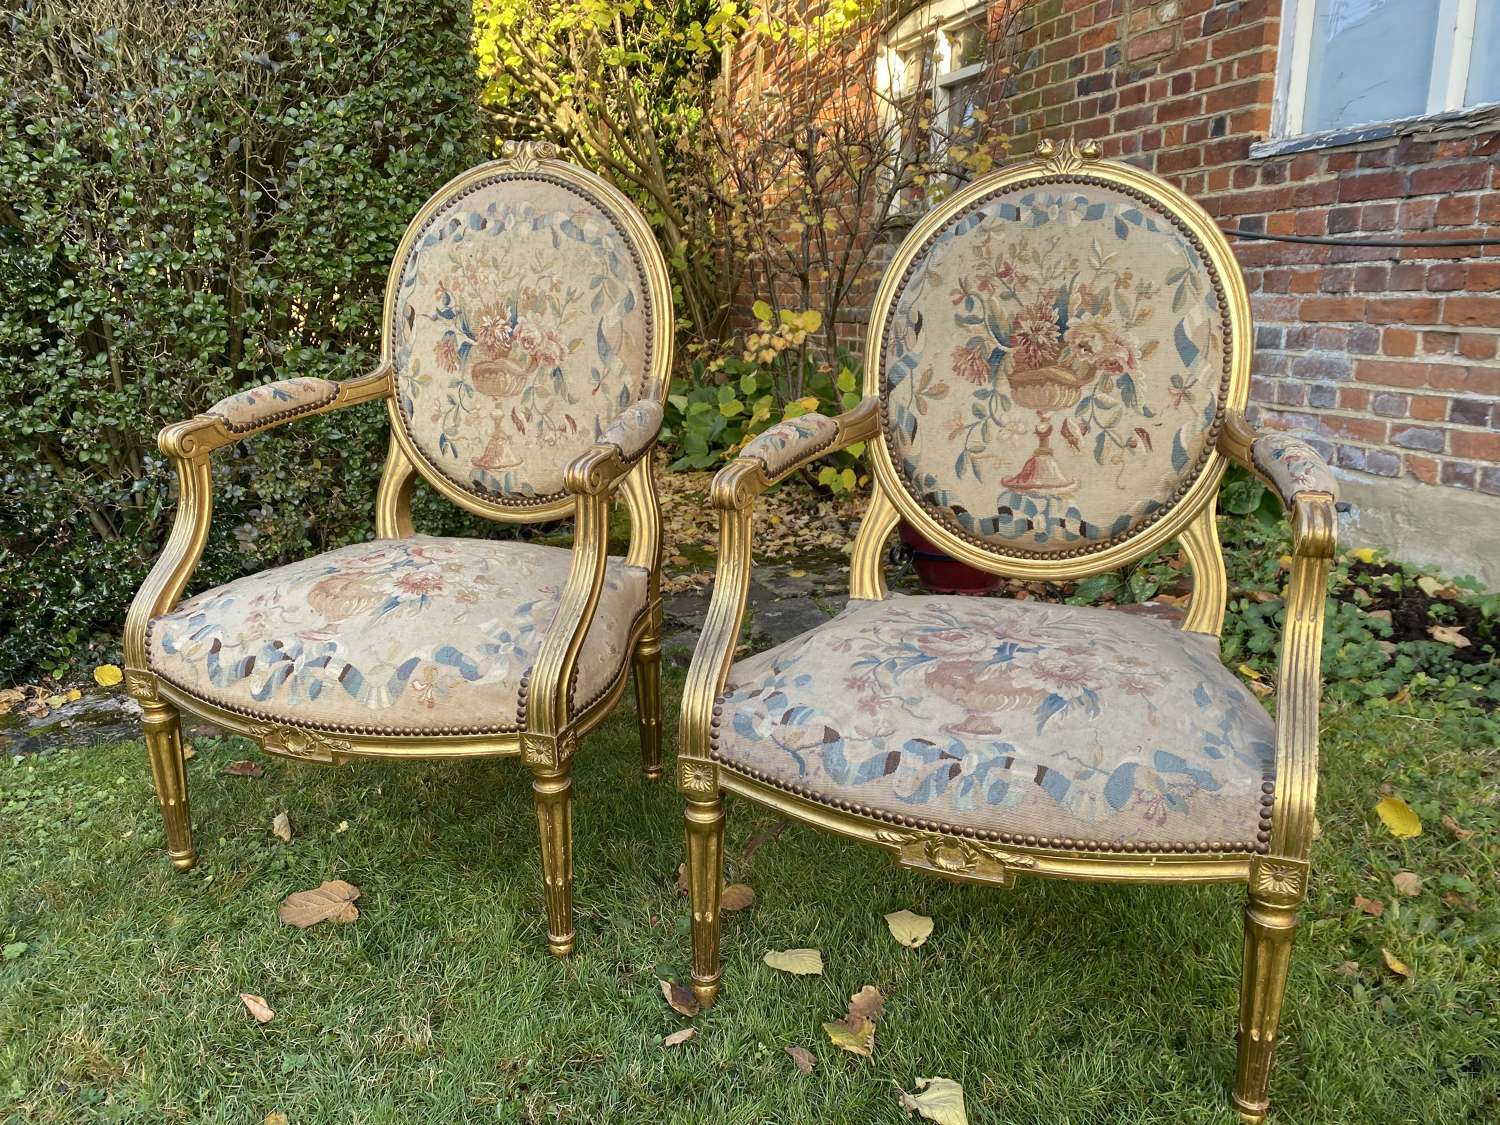 Pair of gilt armchairs with Aubusson tapestry